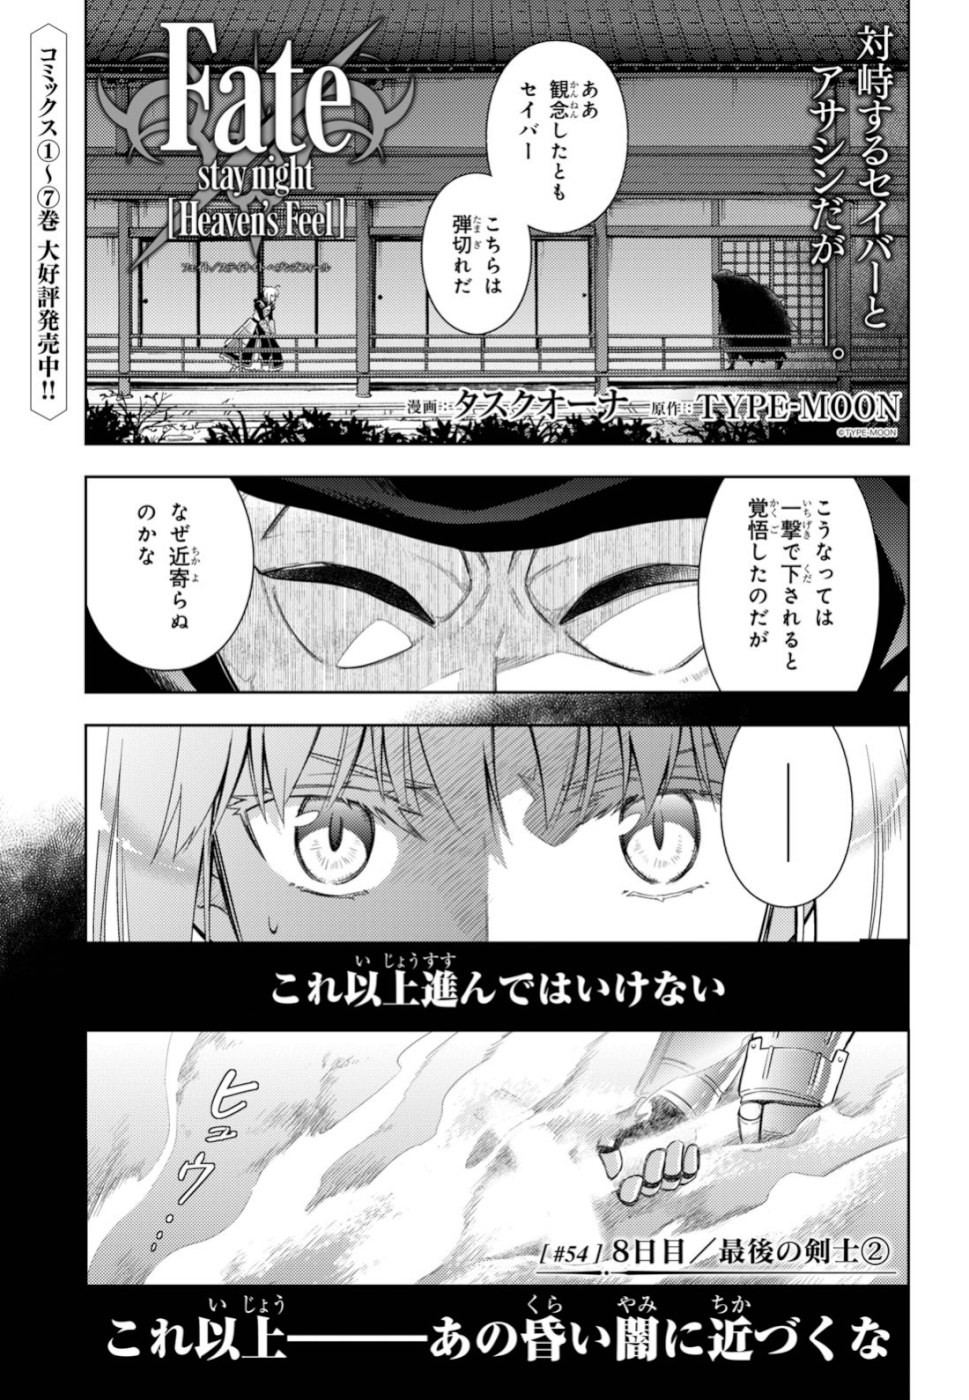 Fate/Stay night Heaven's Feel - Chapter 54 - Page 1